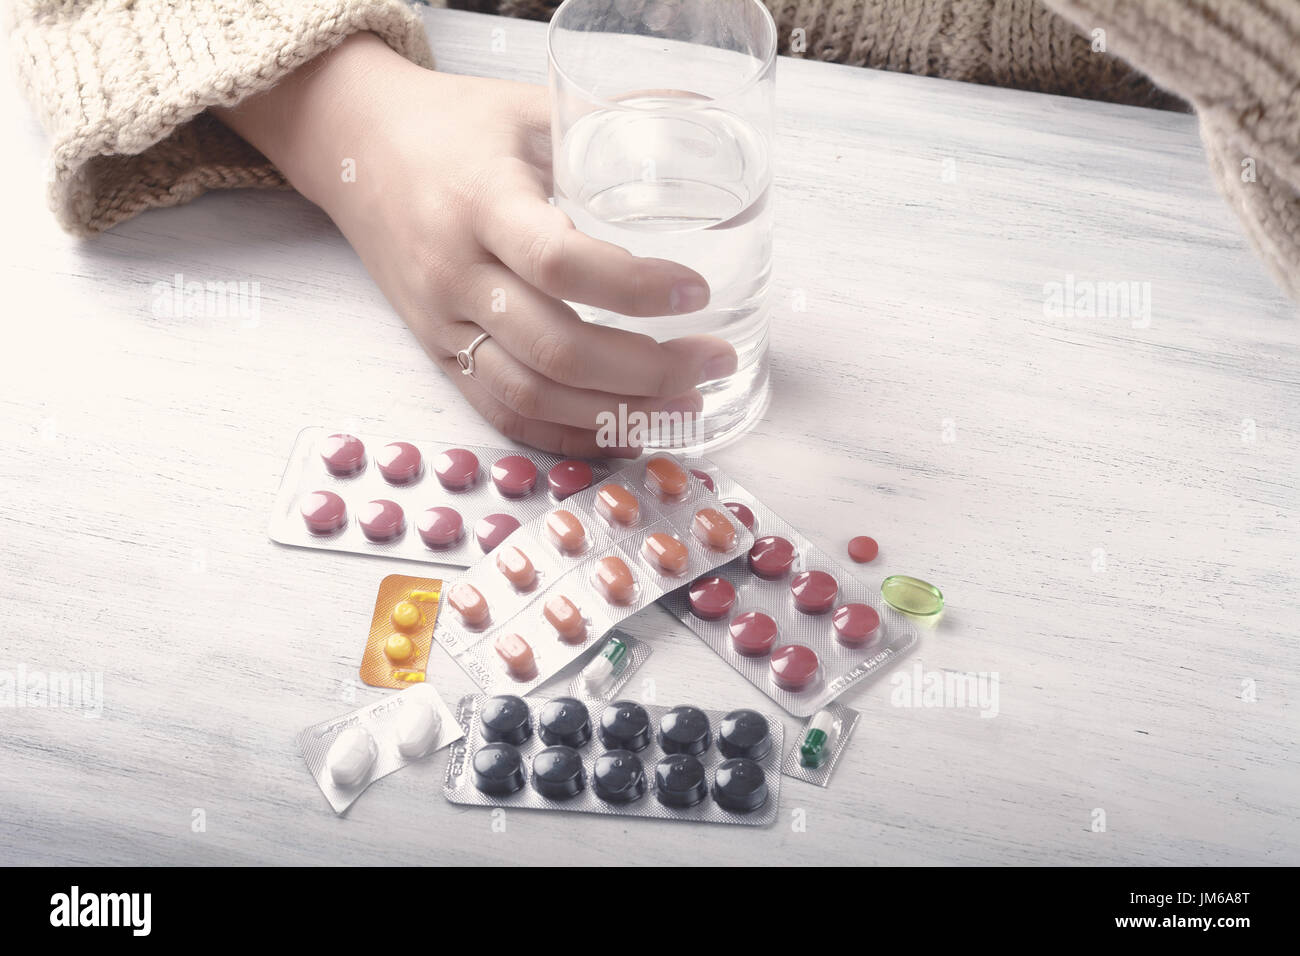 Close-up of woman hands with glass of water, pills and tablets. Healthcare concept. Stock Photo